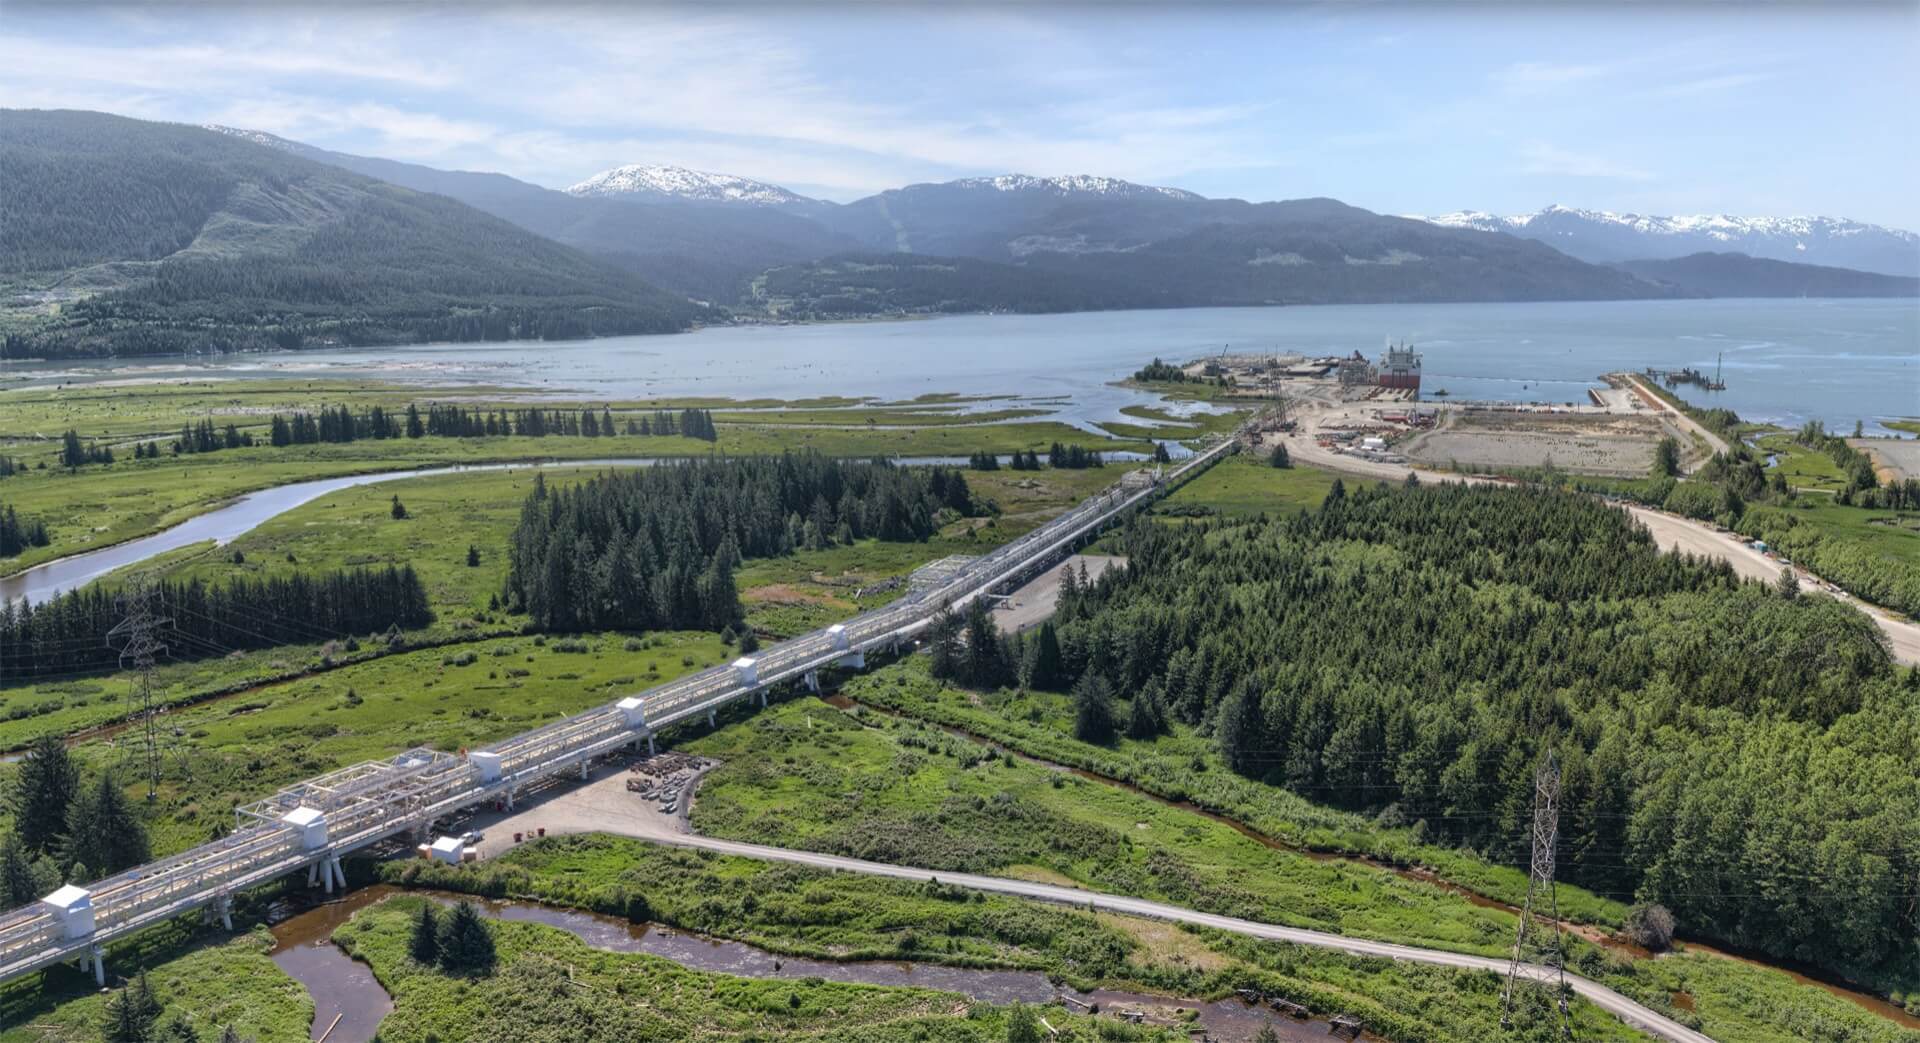 LNG Canada liquefied natural gas facility modules arrived on ships from China to this deep water terminal at Kitimat, British Columbia.